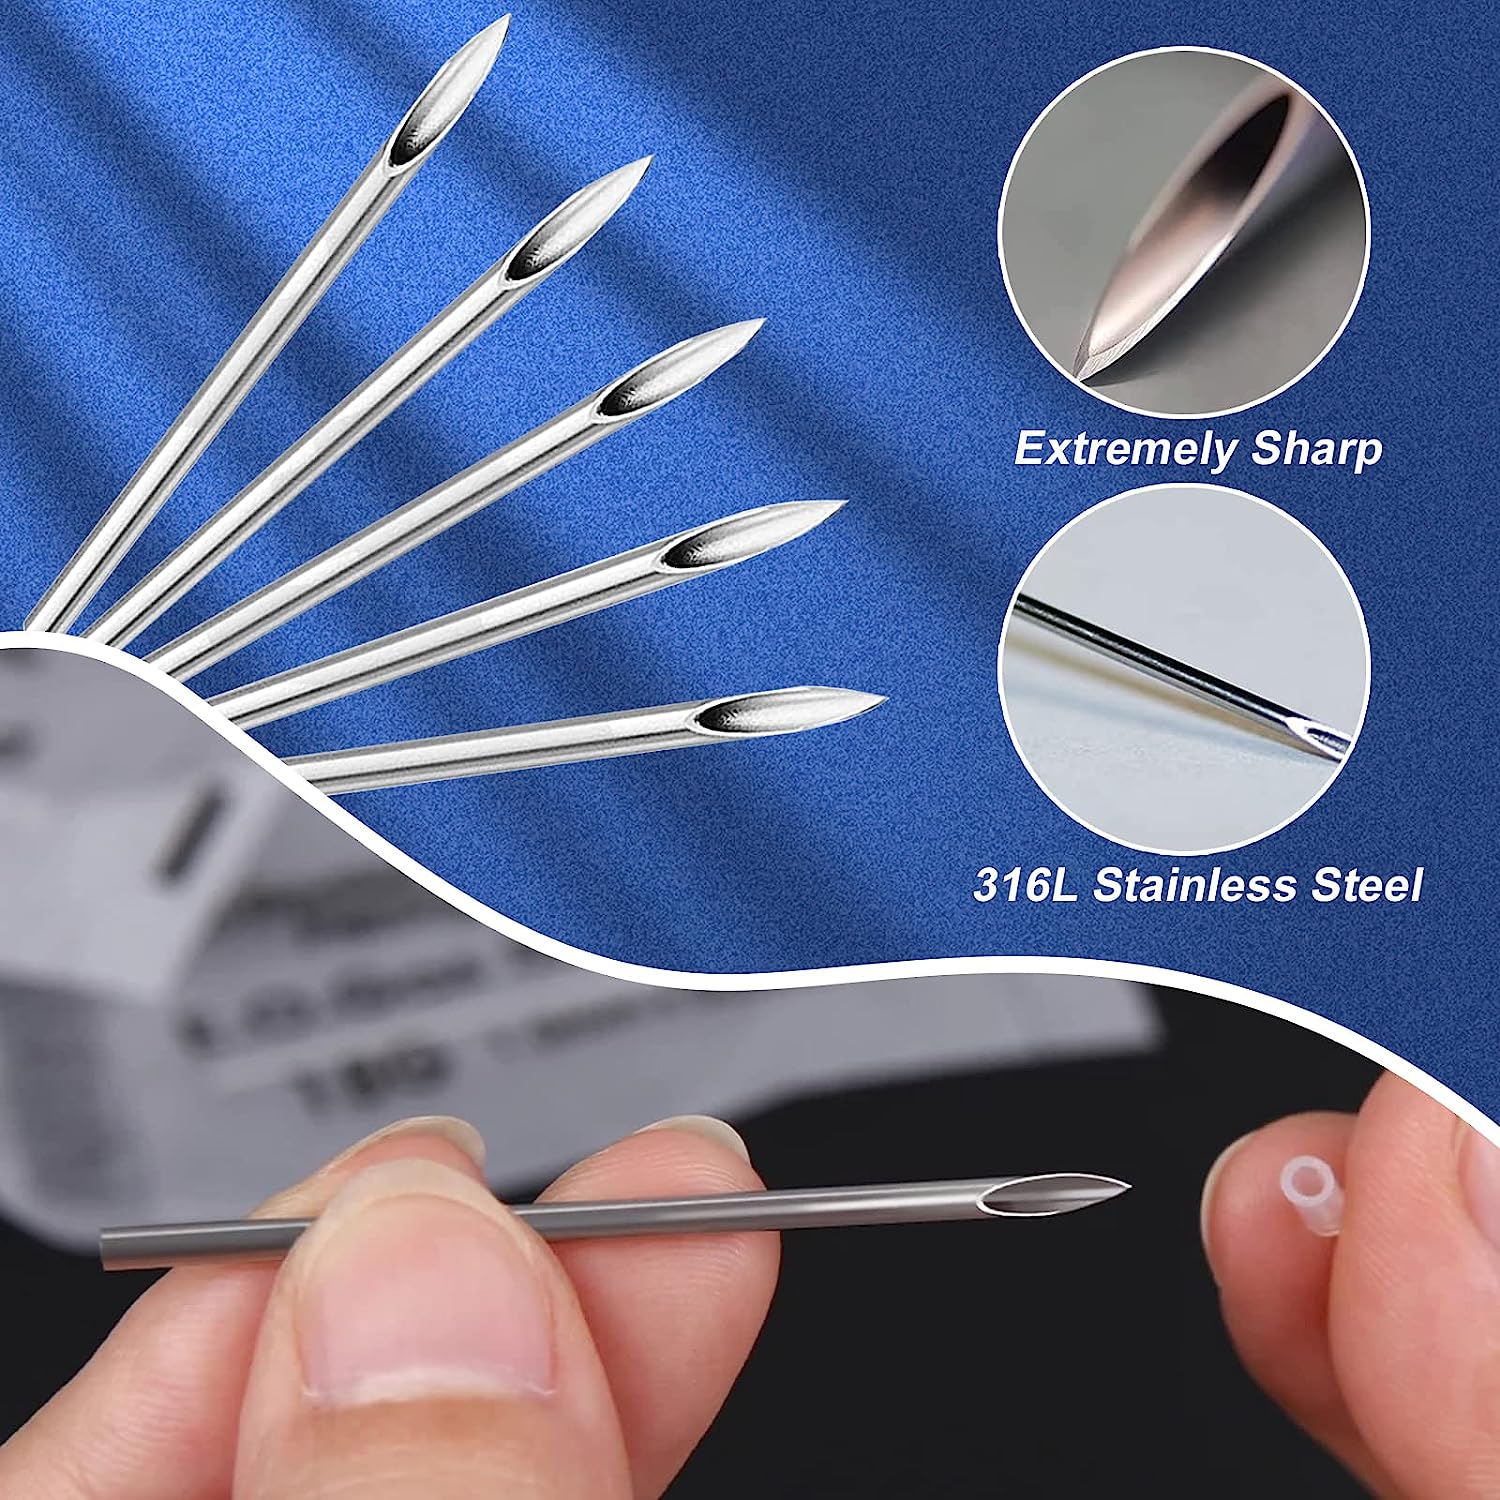 Piercing Needles - 50pcs Mixed Ear Nose Body Piercing Needles Hollow  Needles Including Sizes 12G 14G 16G 18G and 20G for Piercing Supplies  Piercing